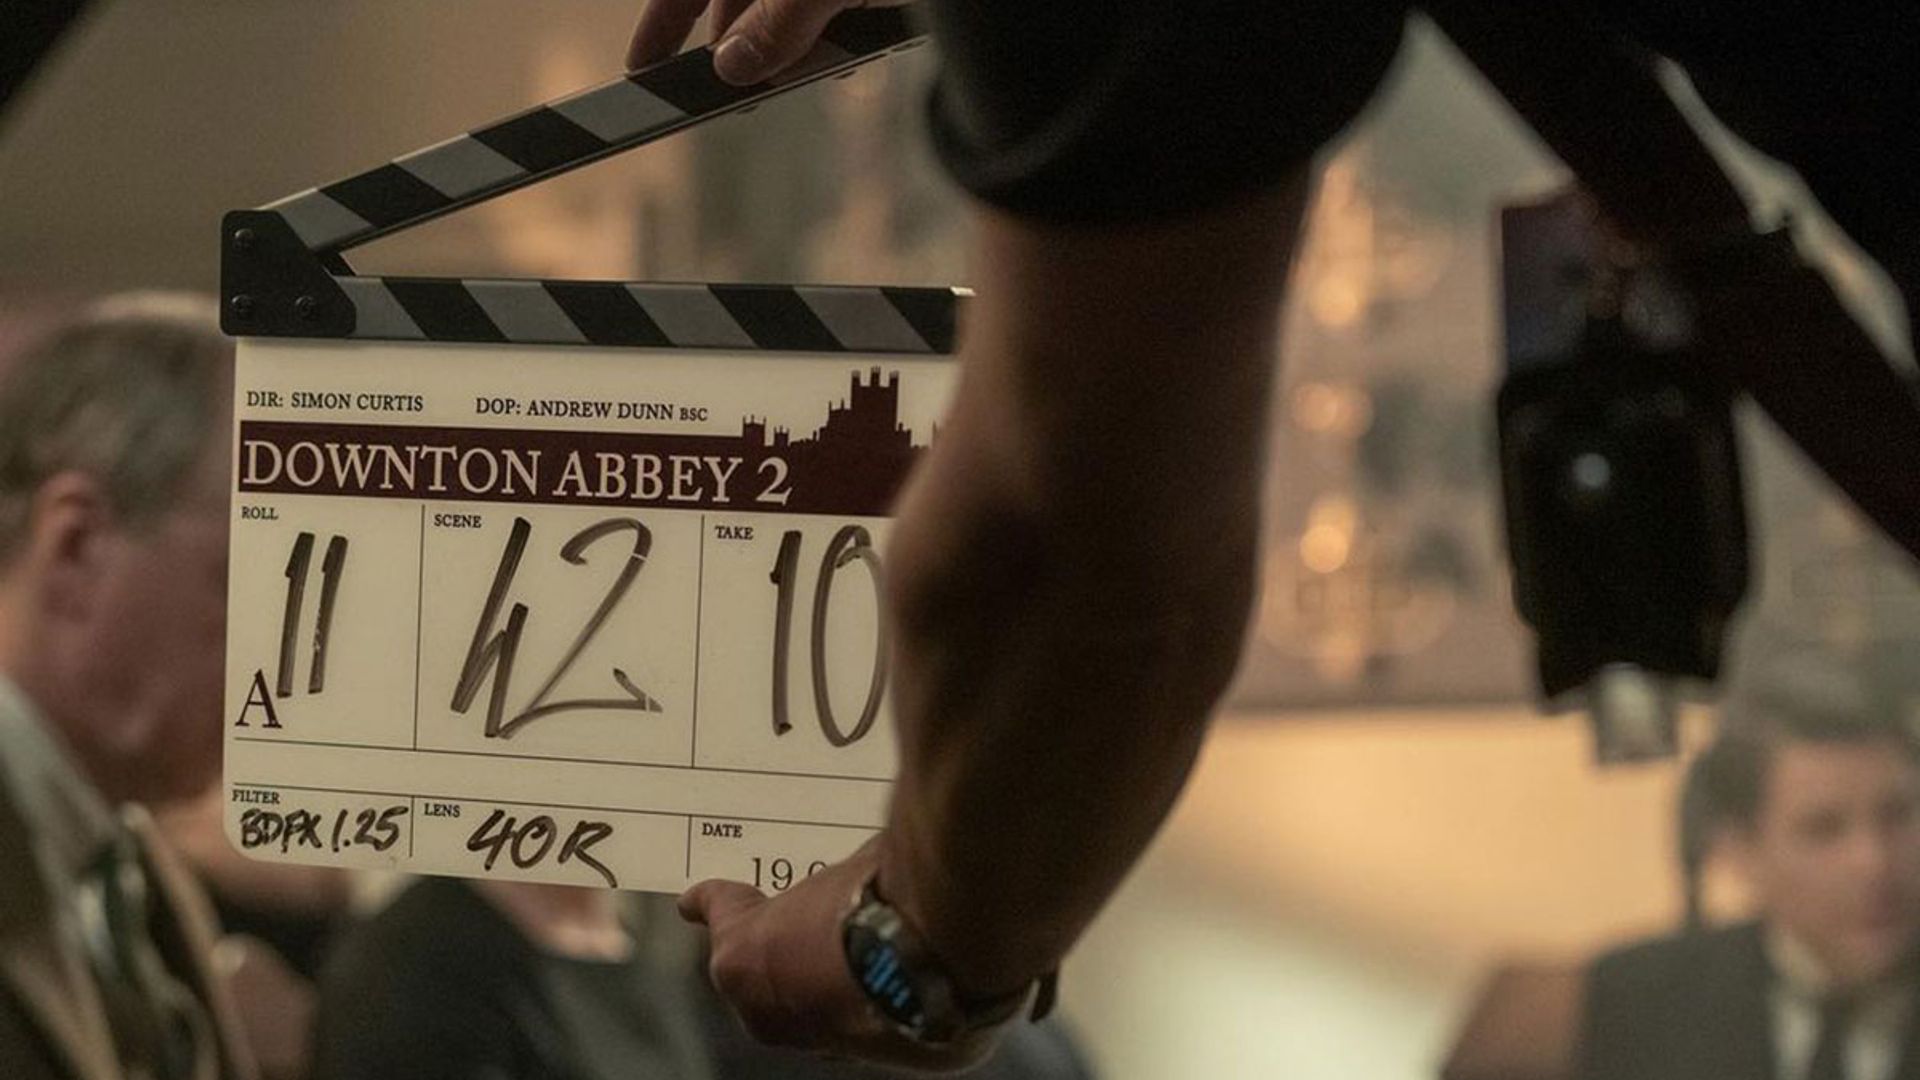 downton abbey sequel filming